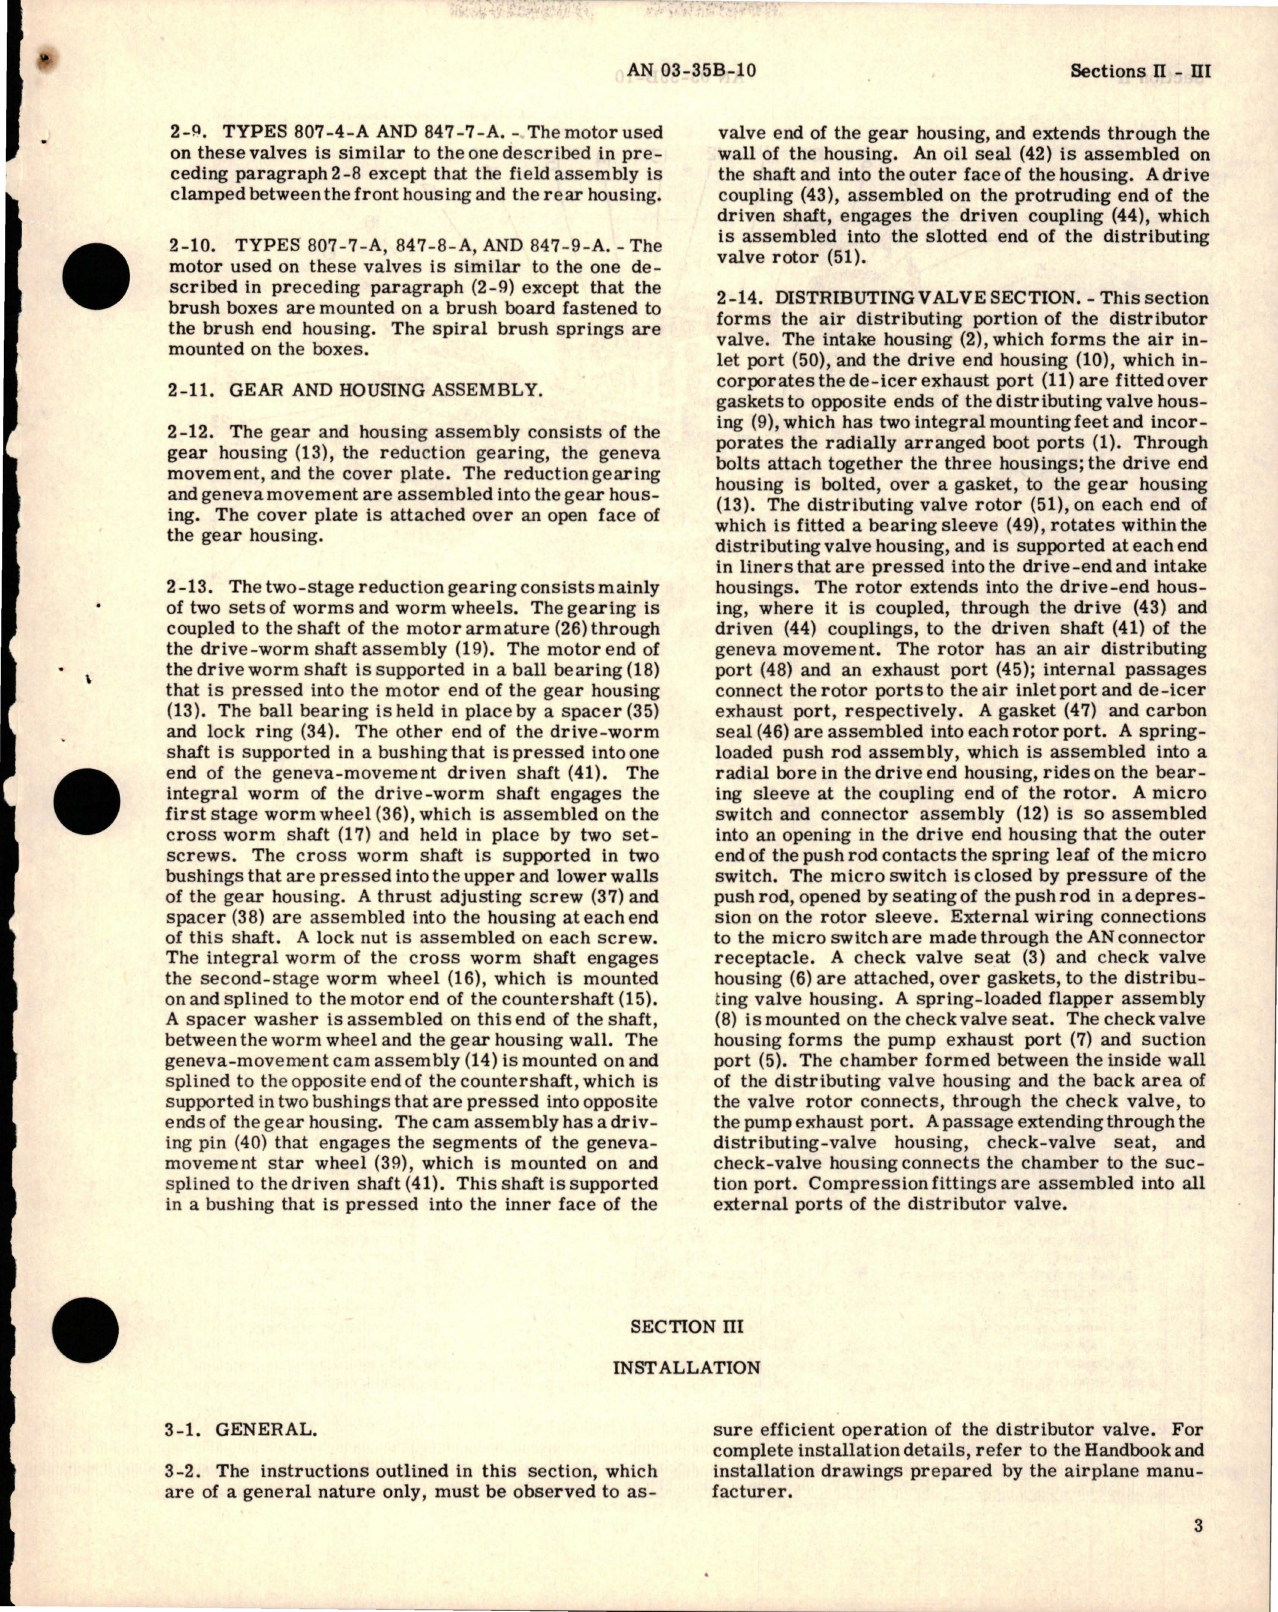 Sample page 9 from AirCorps Library document: Operation, Service and Overhaul Instructions with Parts Catalog for Snap-Action De-Icer Air Distributor Valves - Types 807 and 847 